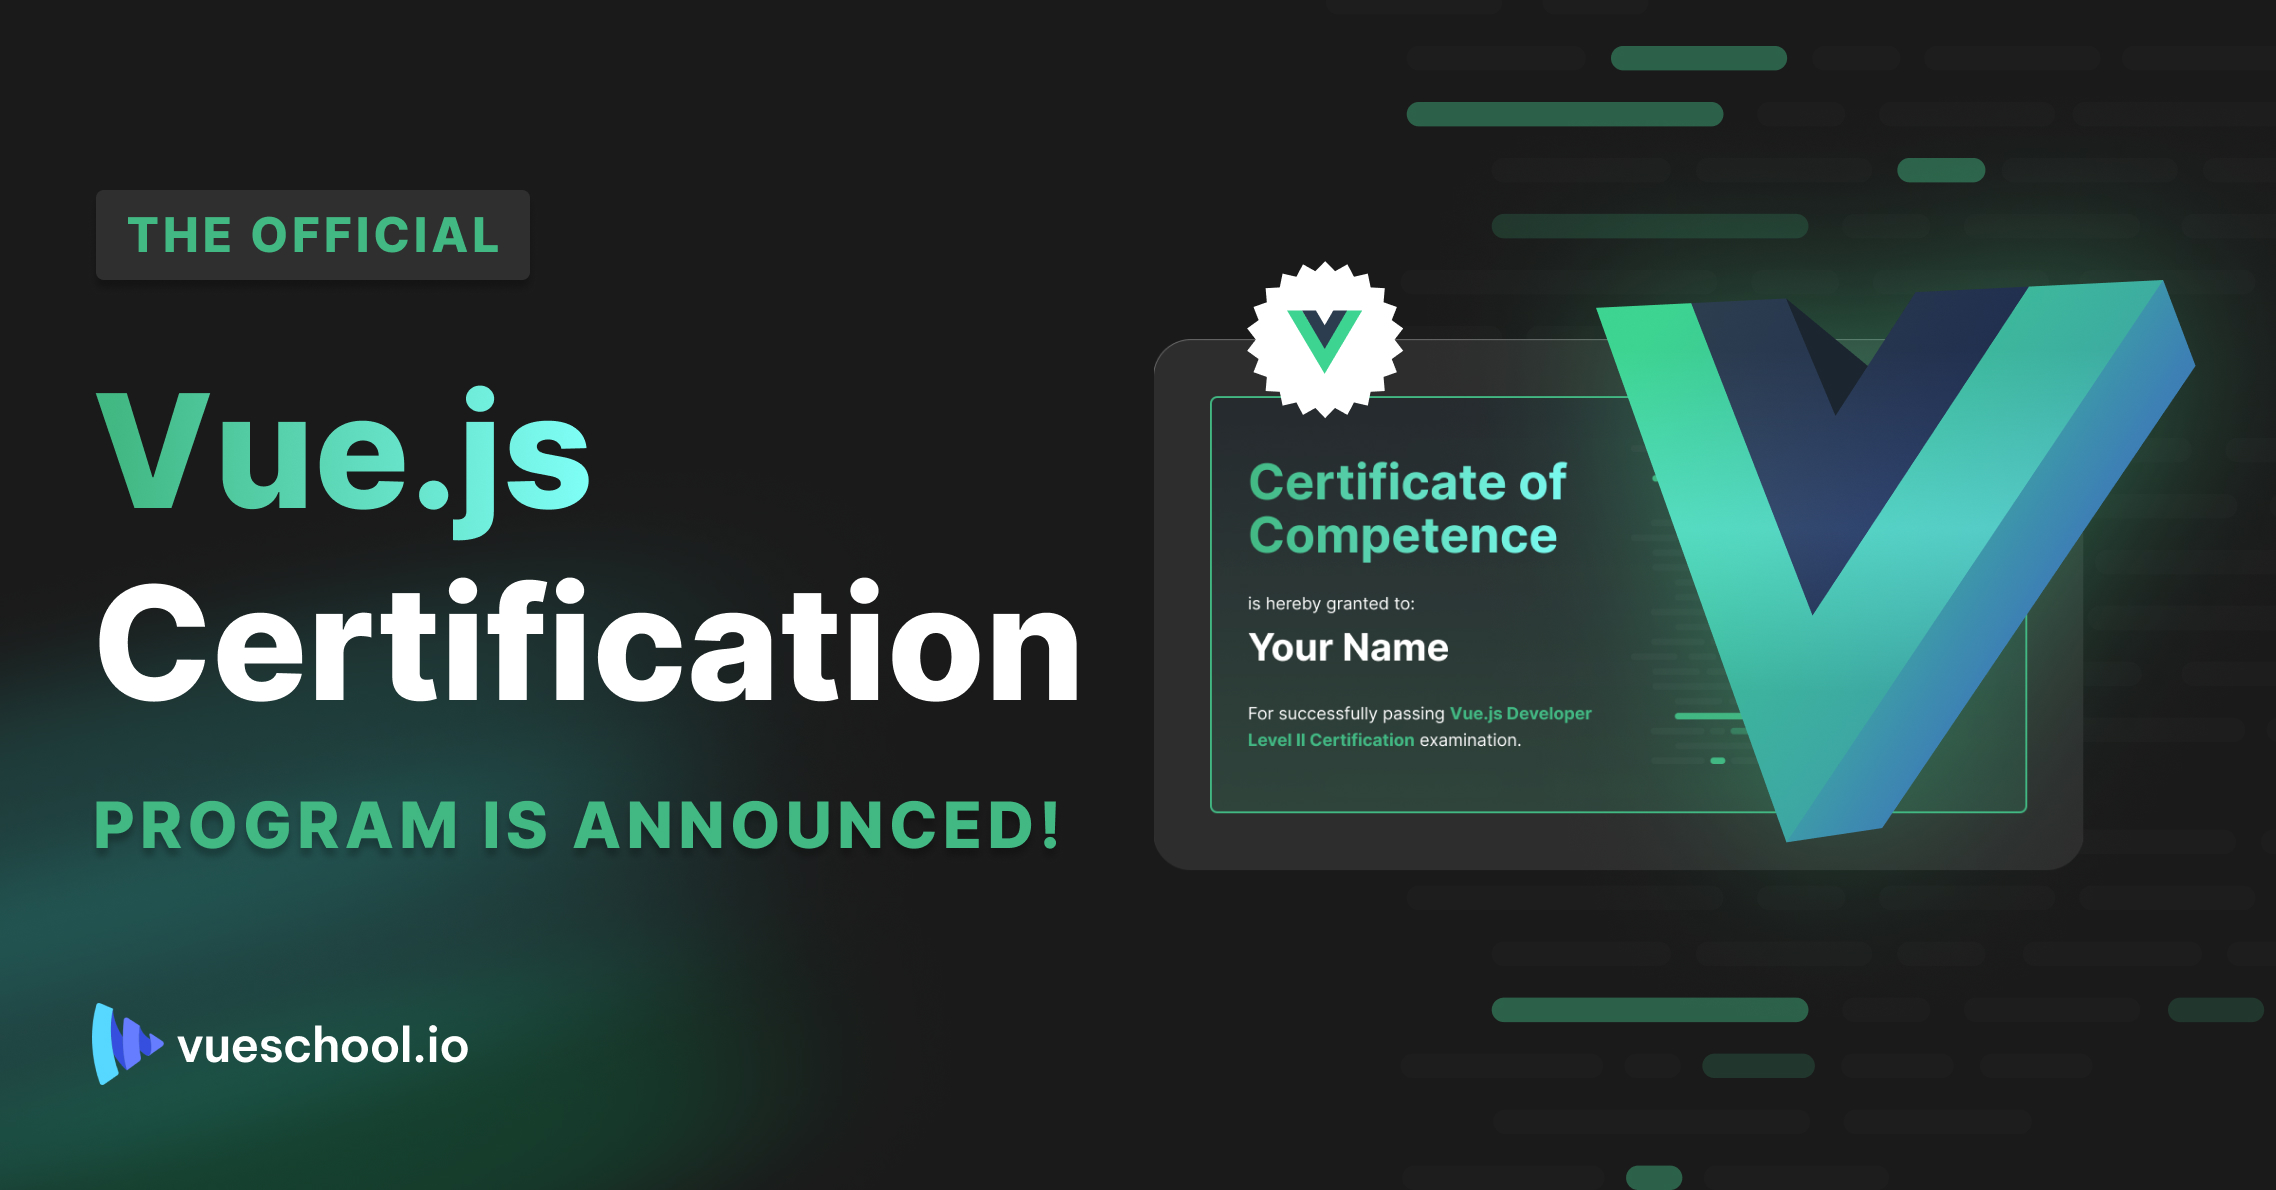 The Official Vue.js Certification Program is Announced!